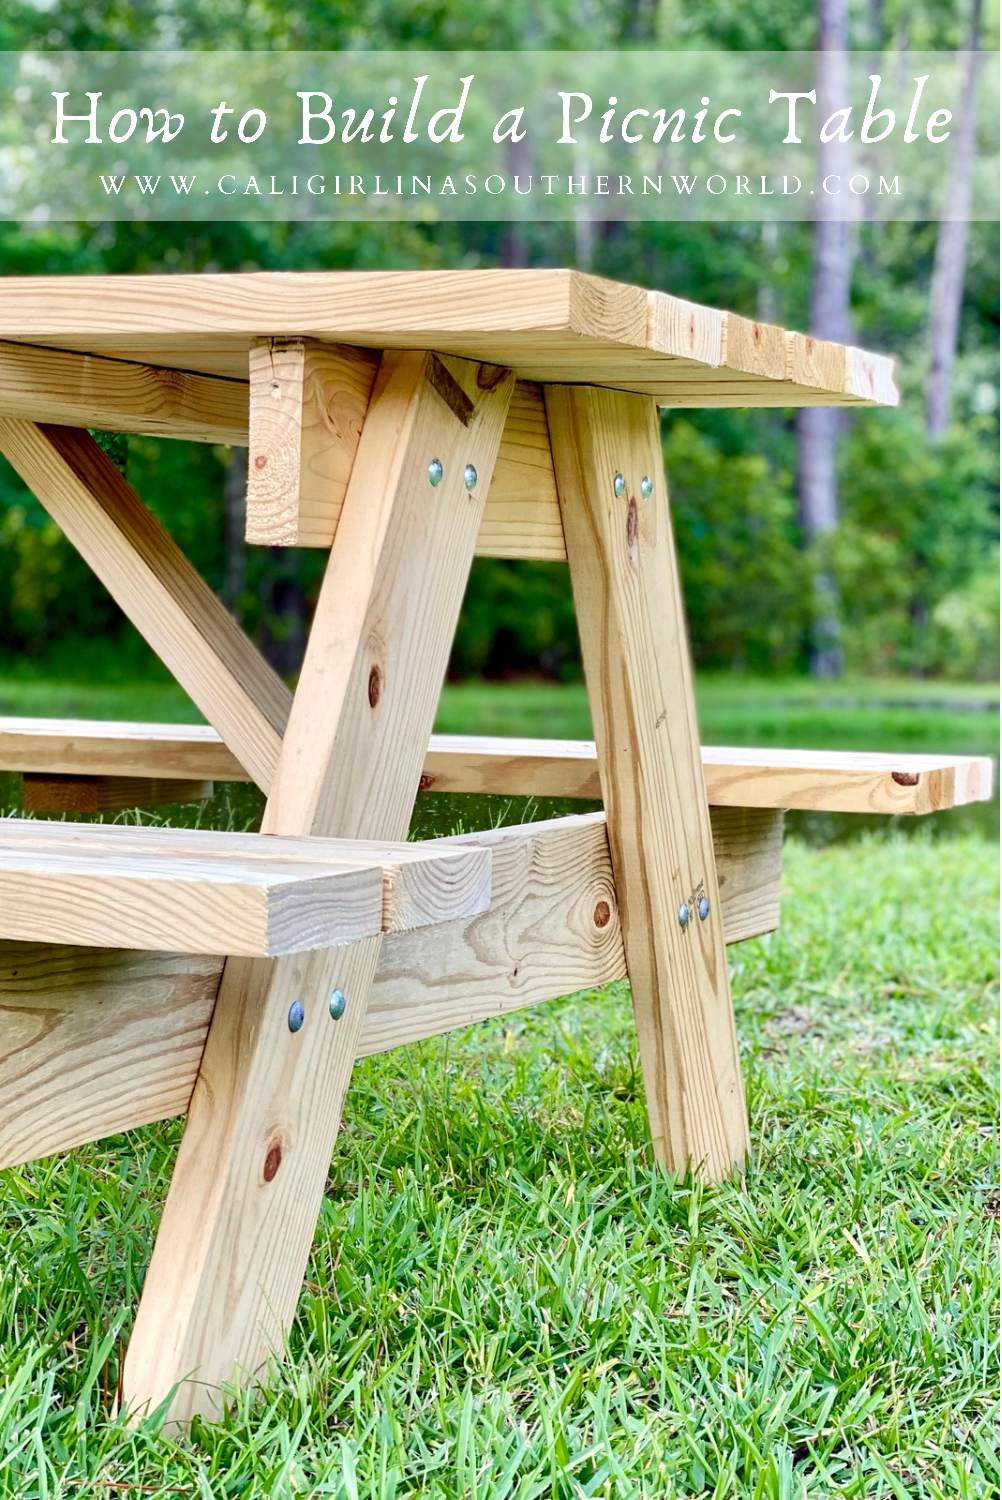 Pinterest Pin of side view of picnic table.